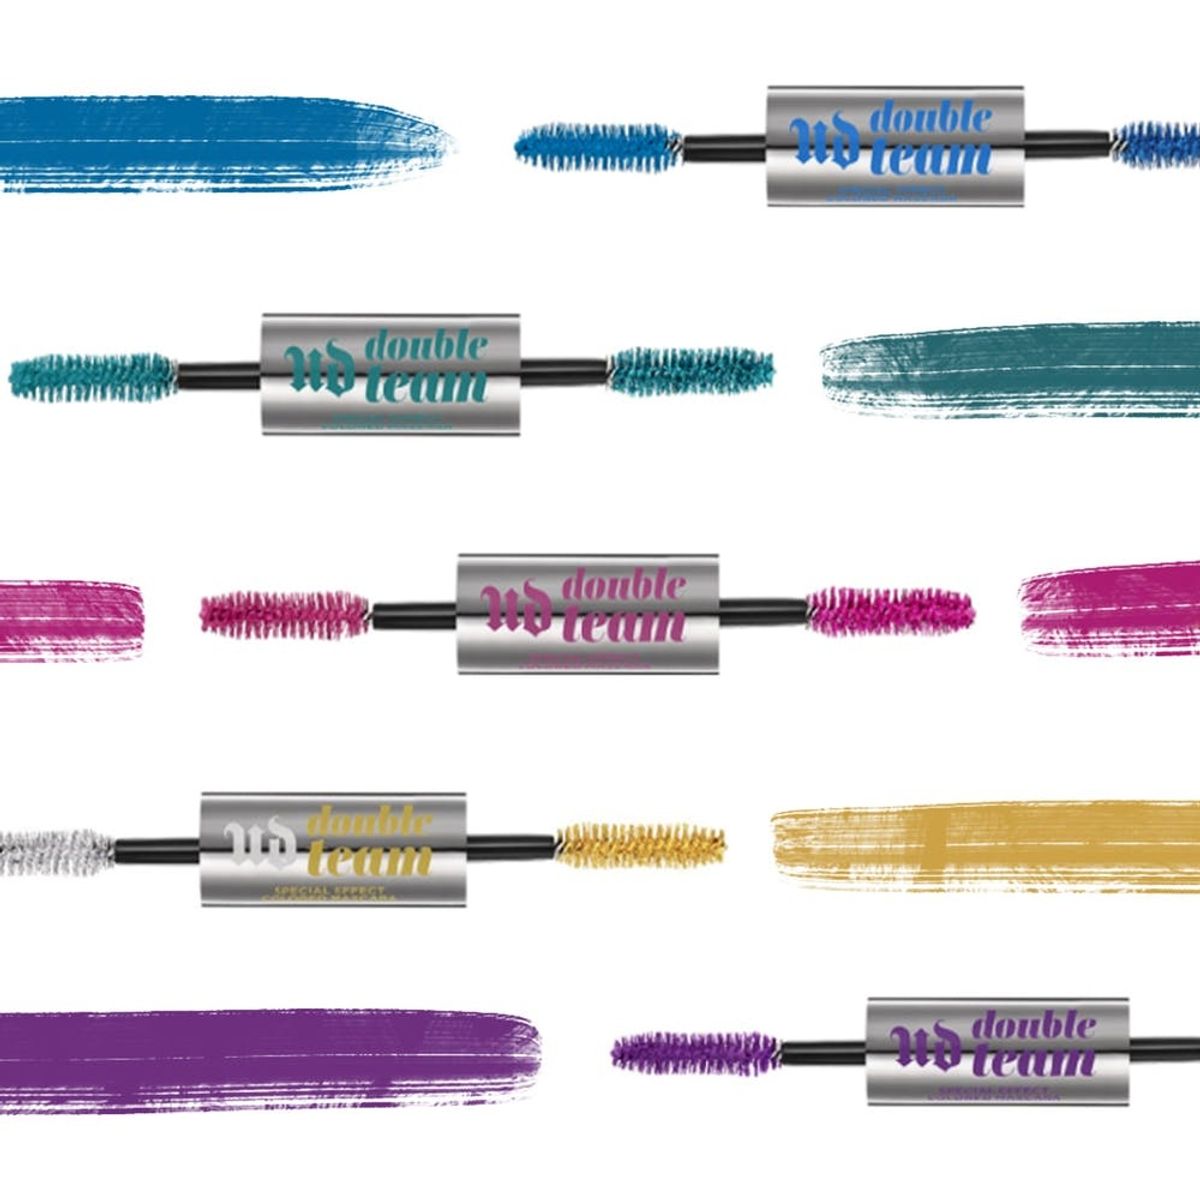 Why Urban Decay’s New Colored Mascara Replaced My Basic Black